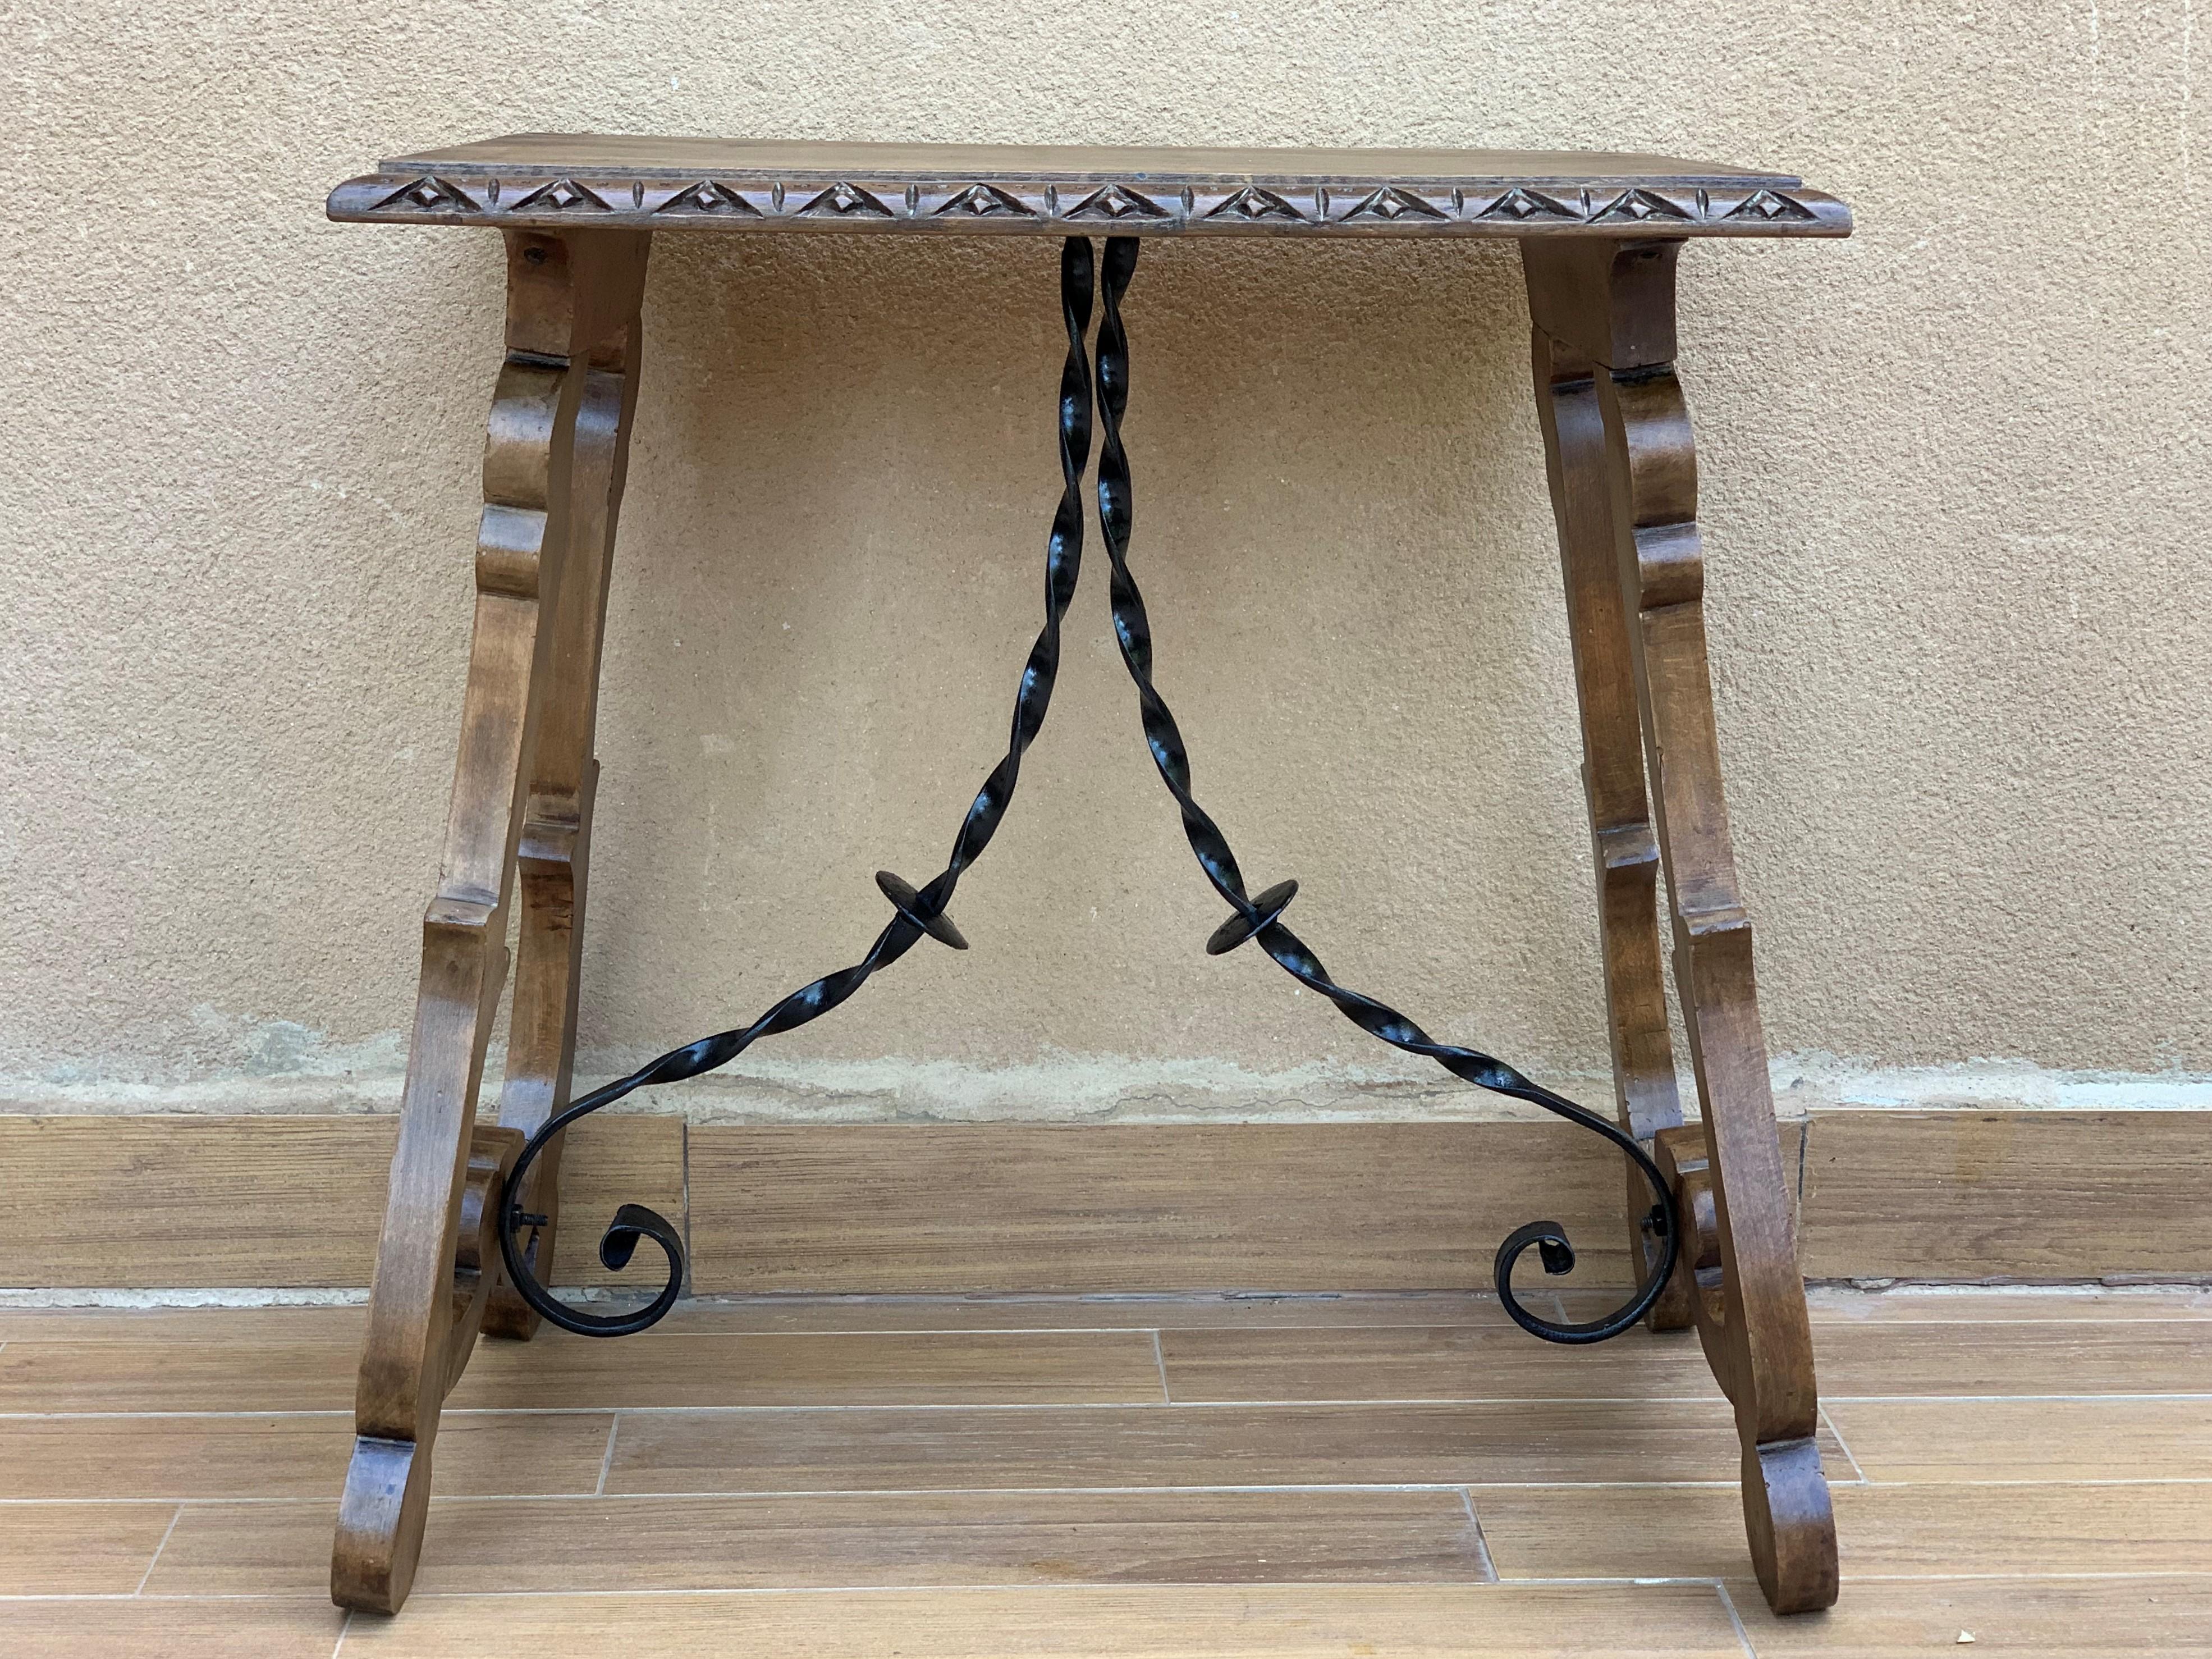 19th century Spanish side table with hand carved lyre leg and iron stretcher.
Exquiste antique hand carved lyre-leg walnut wood Fratino trestle table with iron stretchers in Baroque style. Spain, 1880s.
This gorgeous Fratino table features a